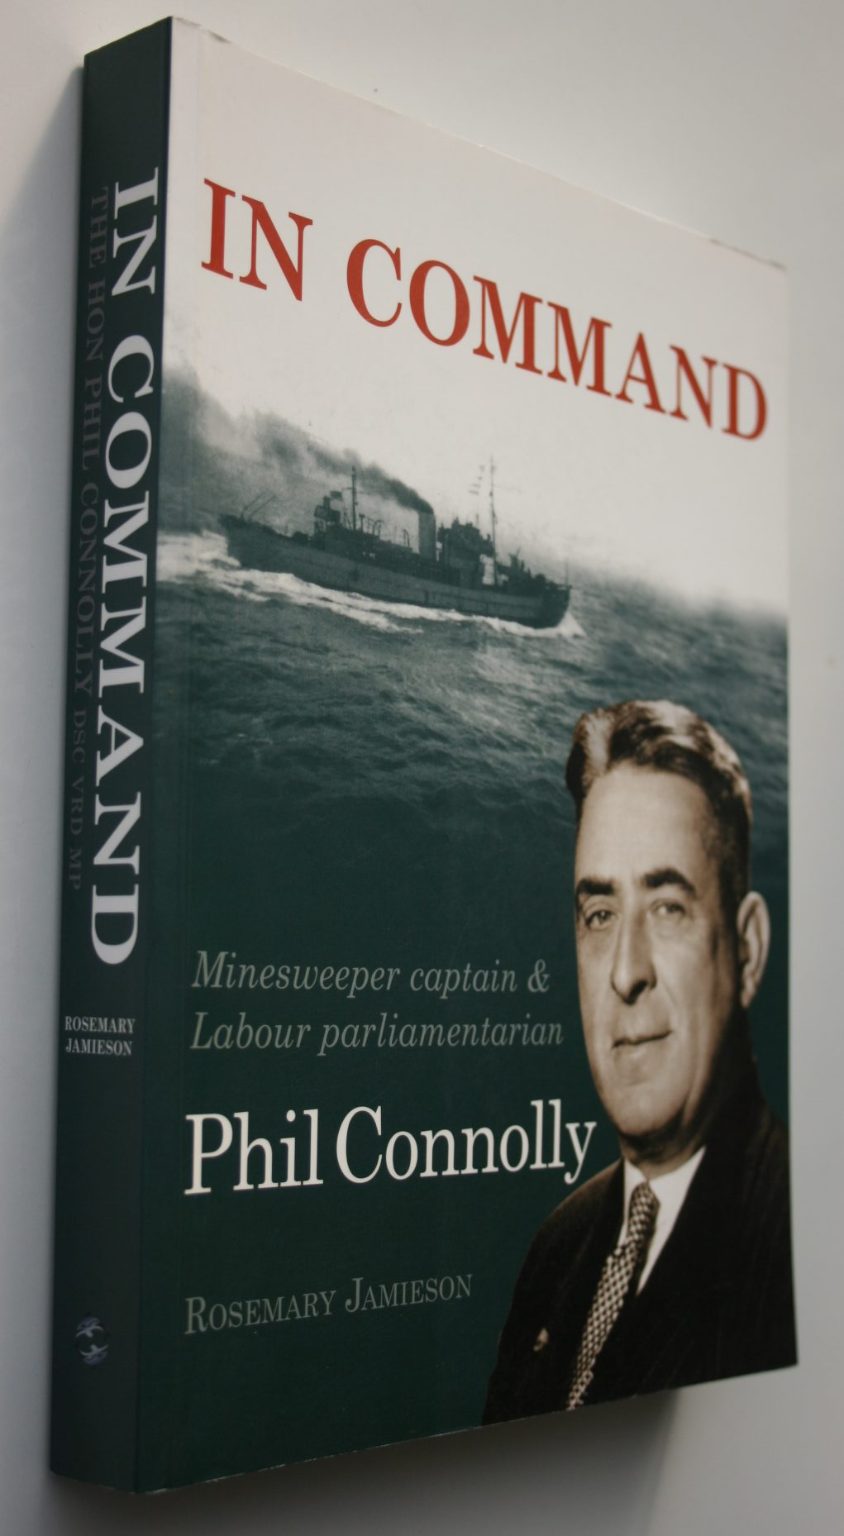 In Command. Minesweeper Captain and Labour Parliamentarian, Phil Connolly by Rosemary Jamieson. SIGNED BY AUTHOR. (daughter of Connolly).